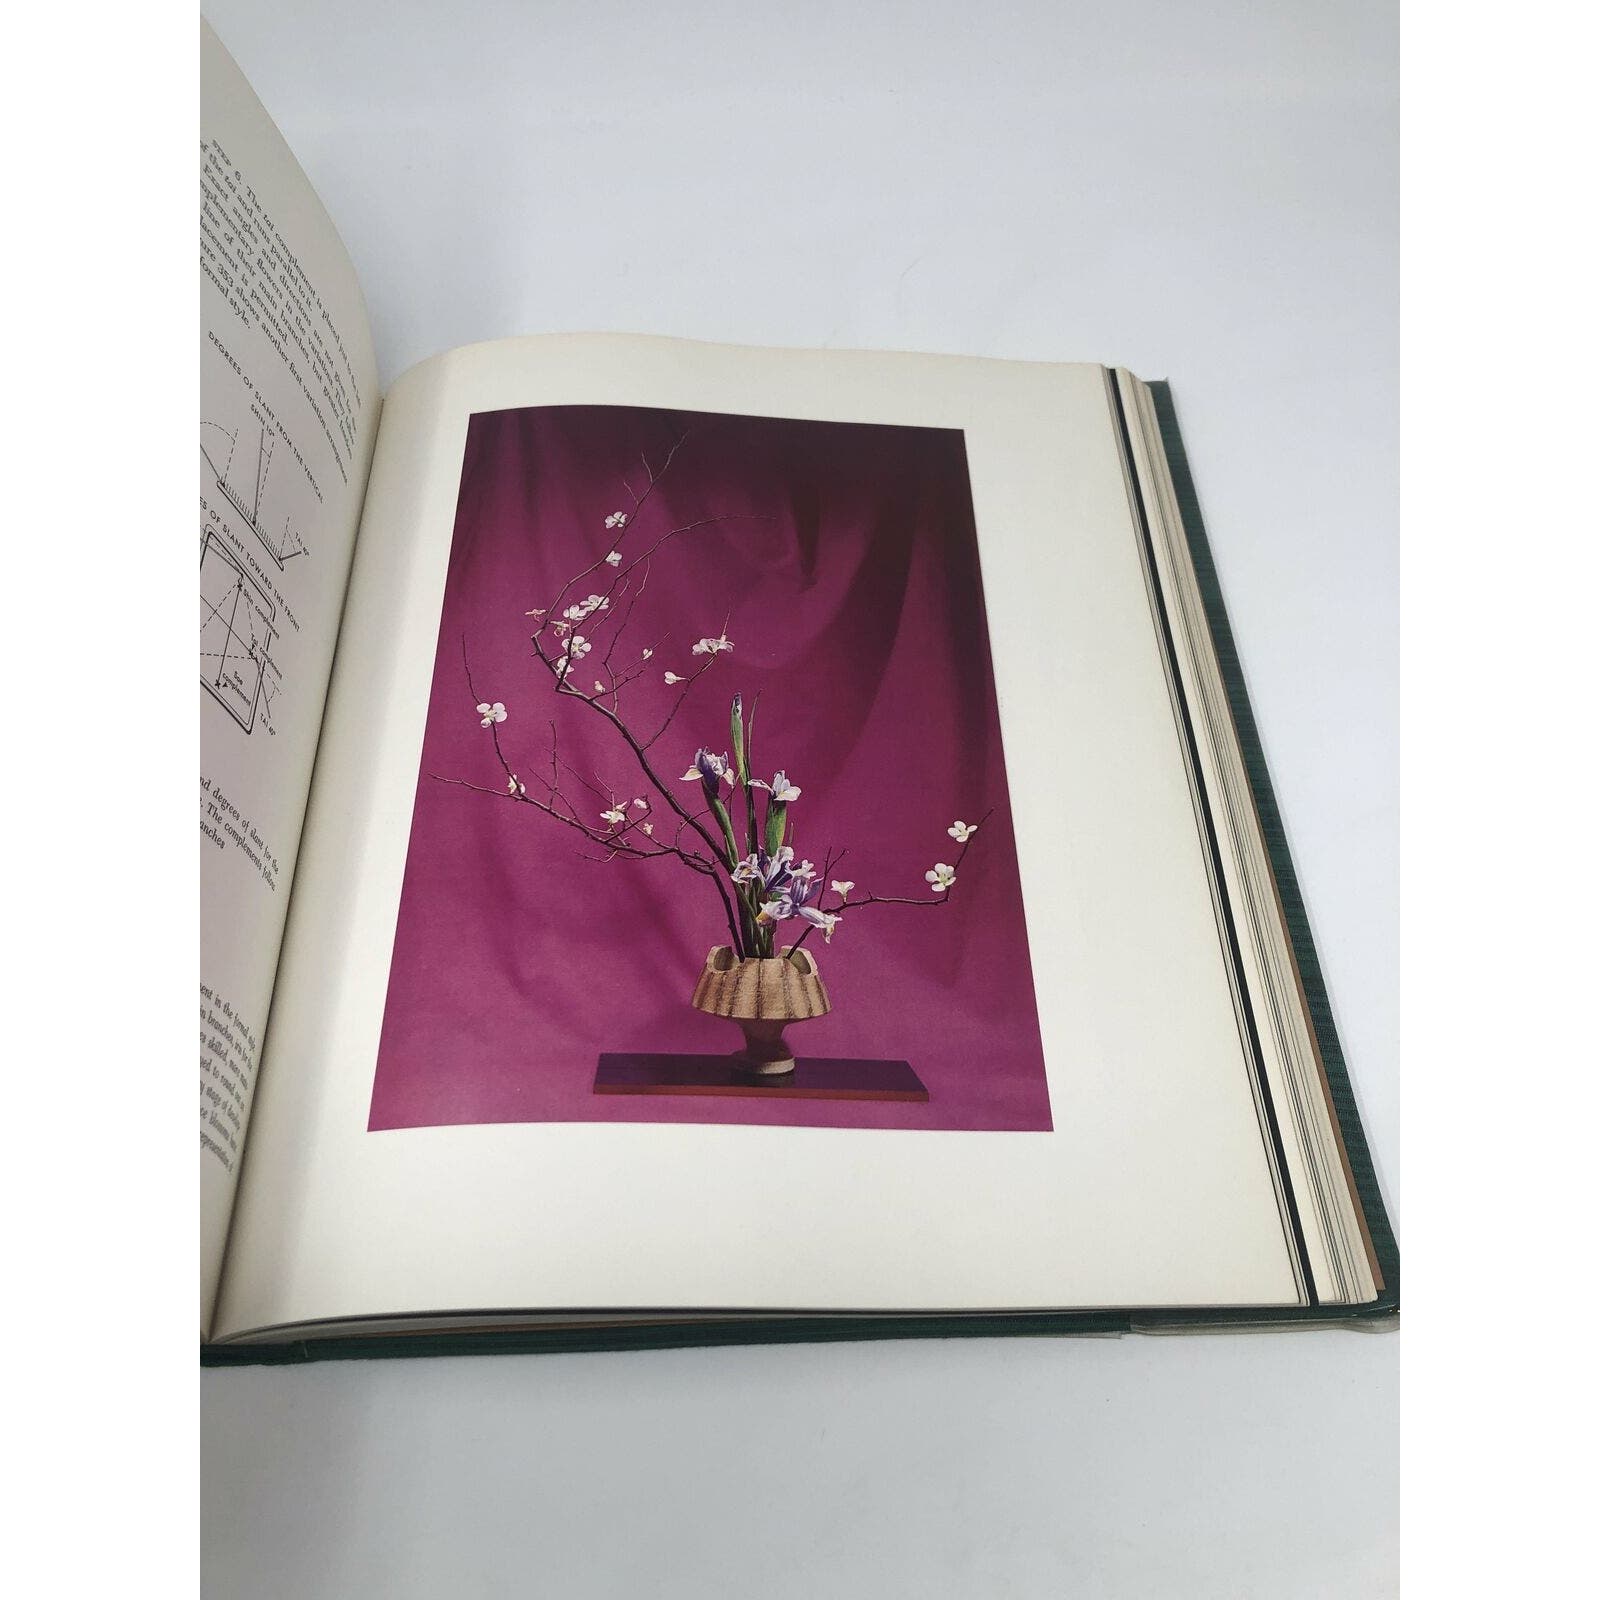 THE ART OF ARRANGING FLOWERS: A COMPLETE GUIDE TO JAPANESE IKEBANA by Shozo Sato - Uncle Buddy's Beard & Used Books